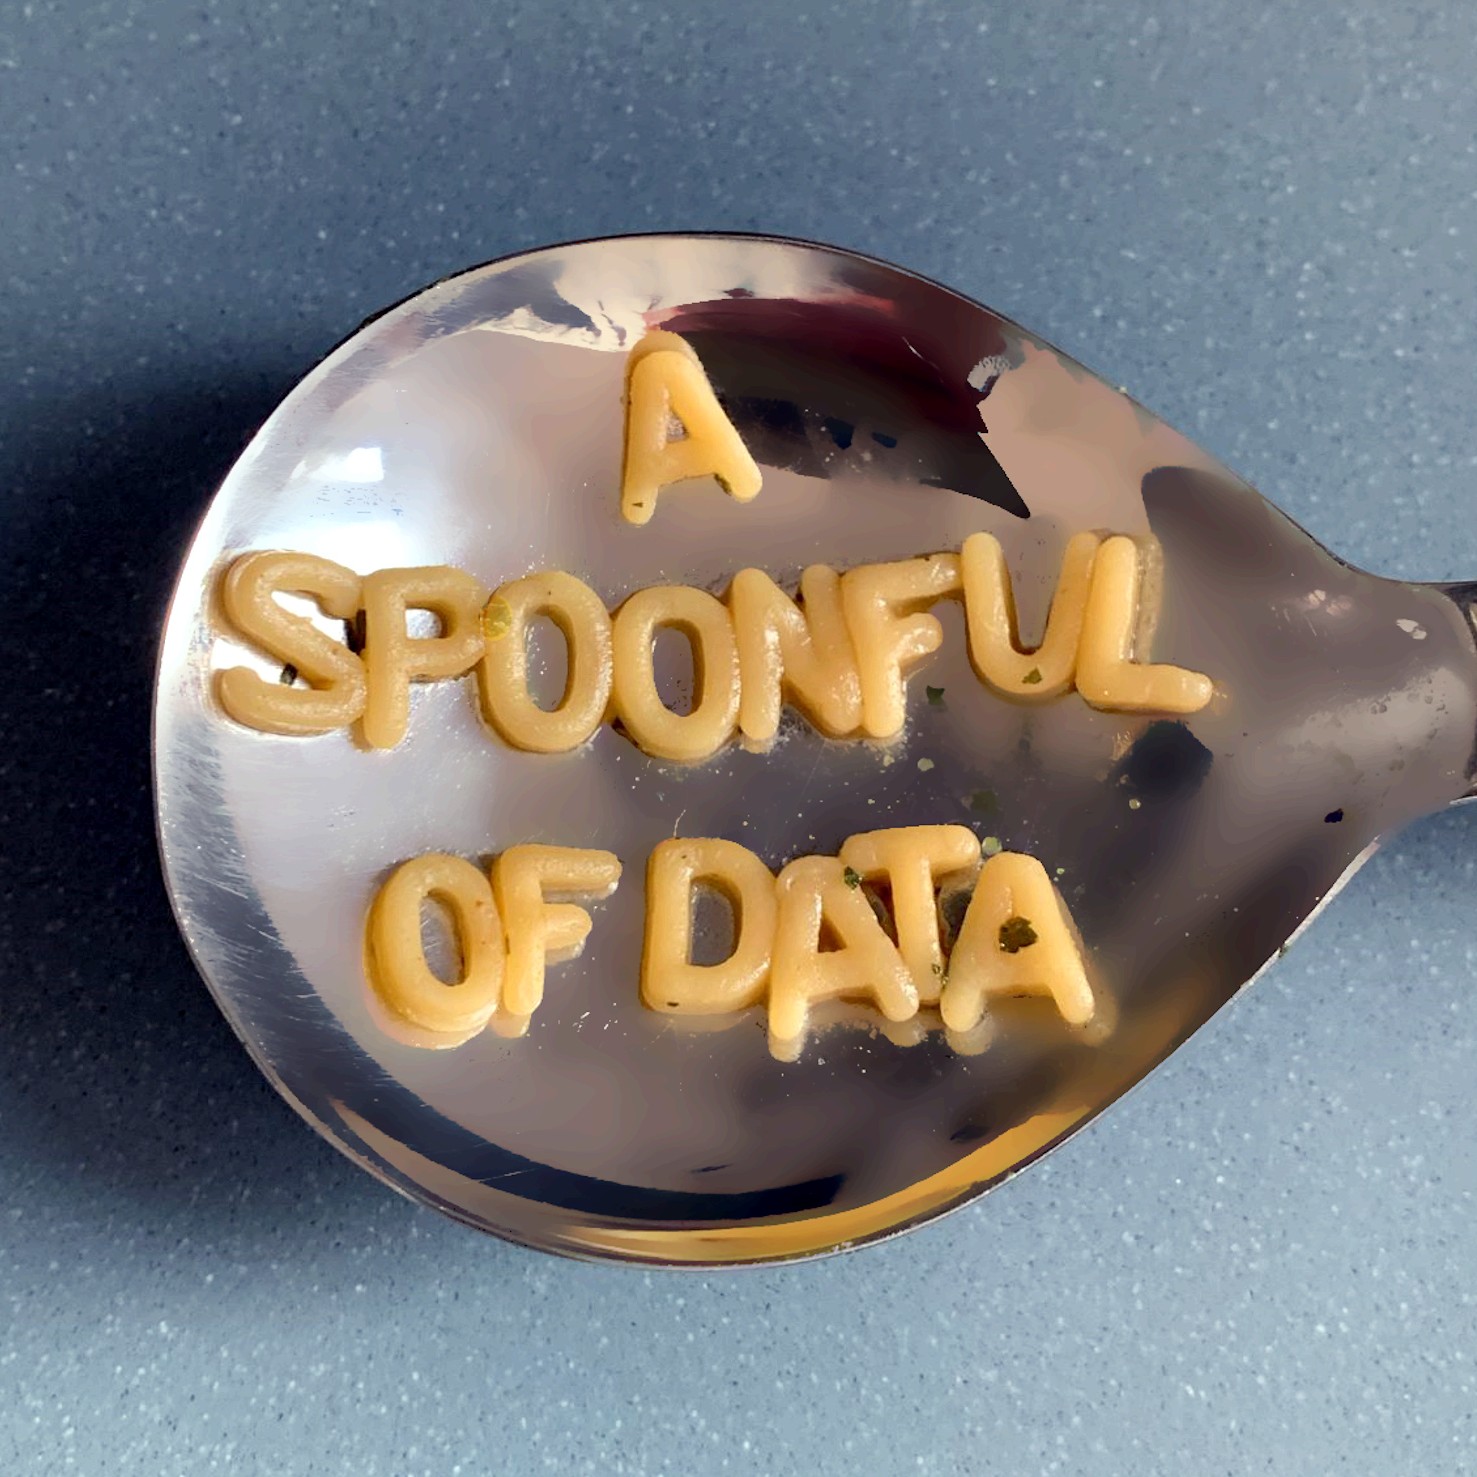 A Spoonful of Data